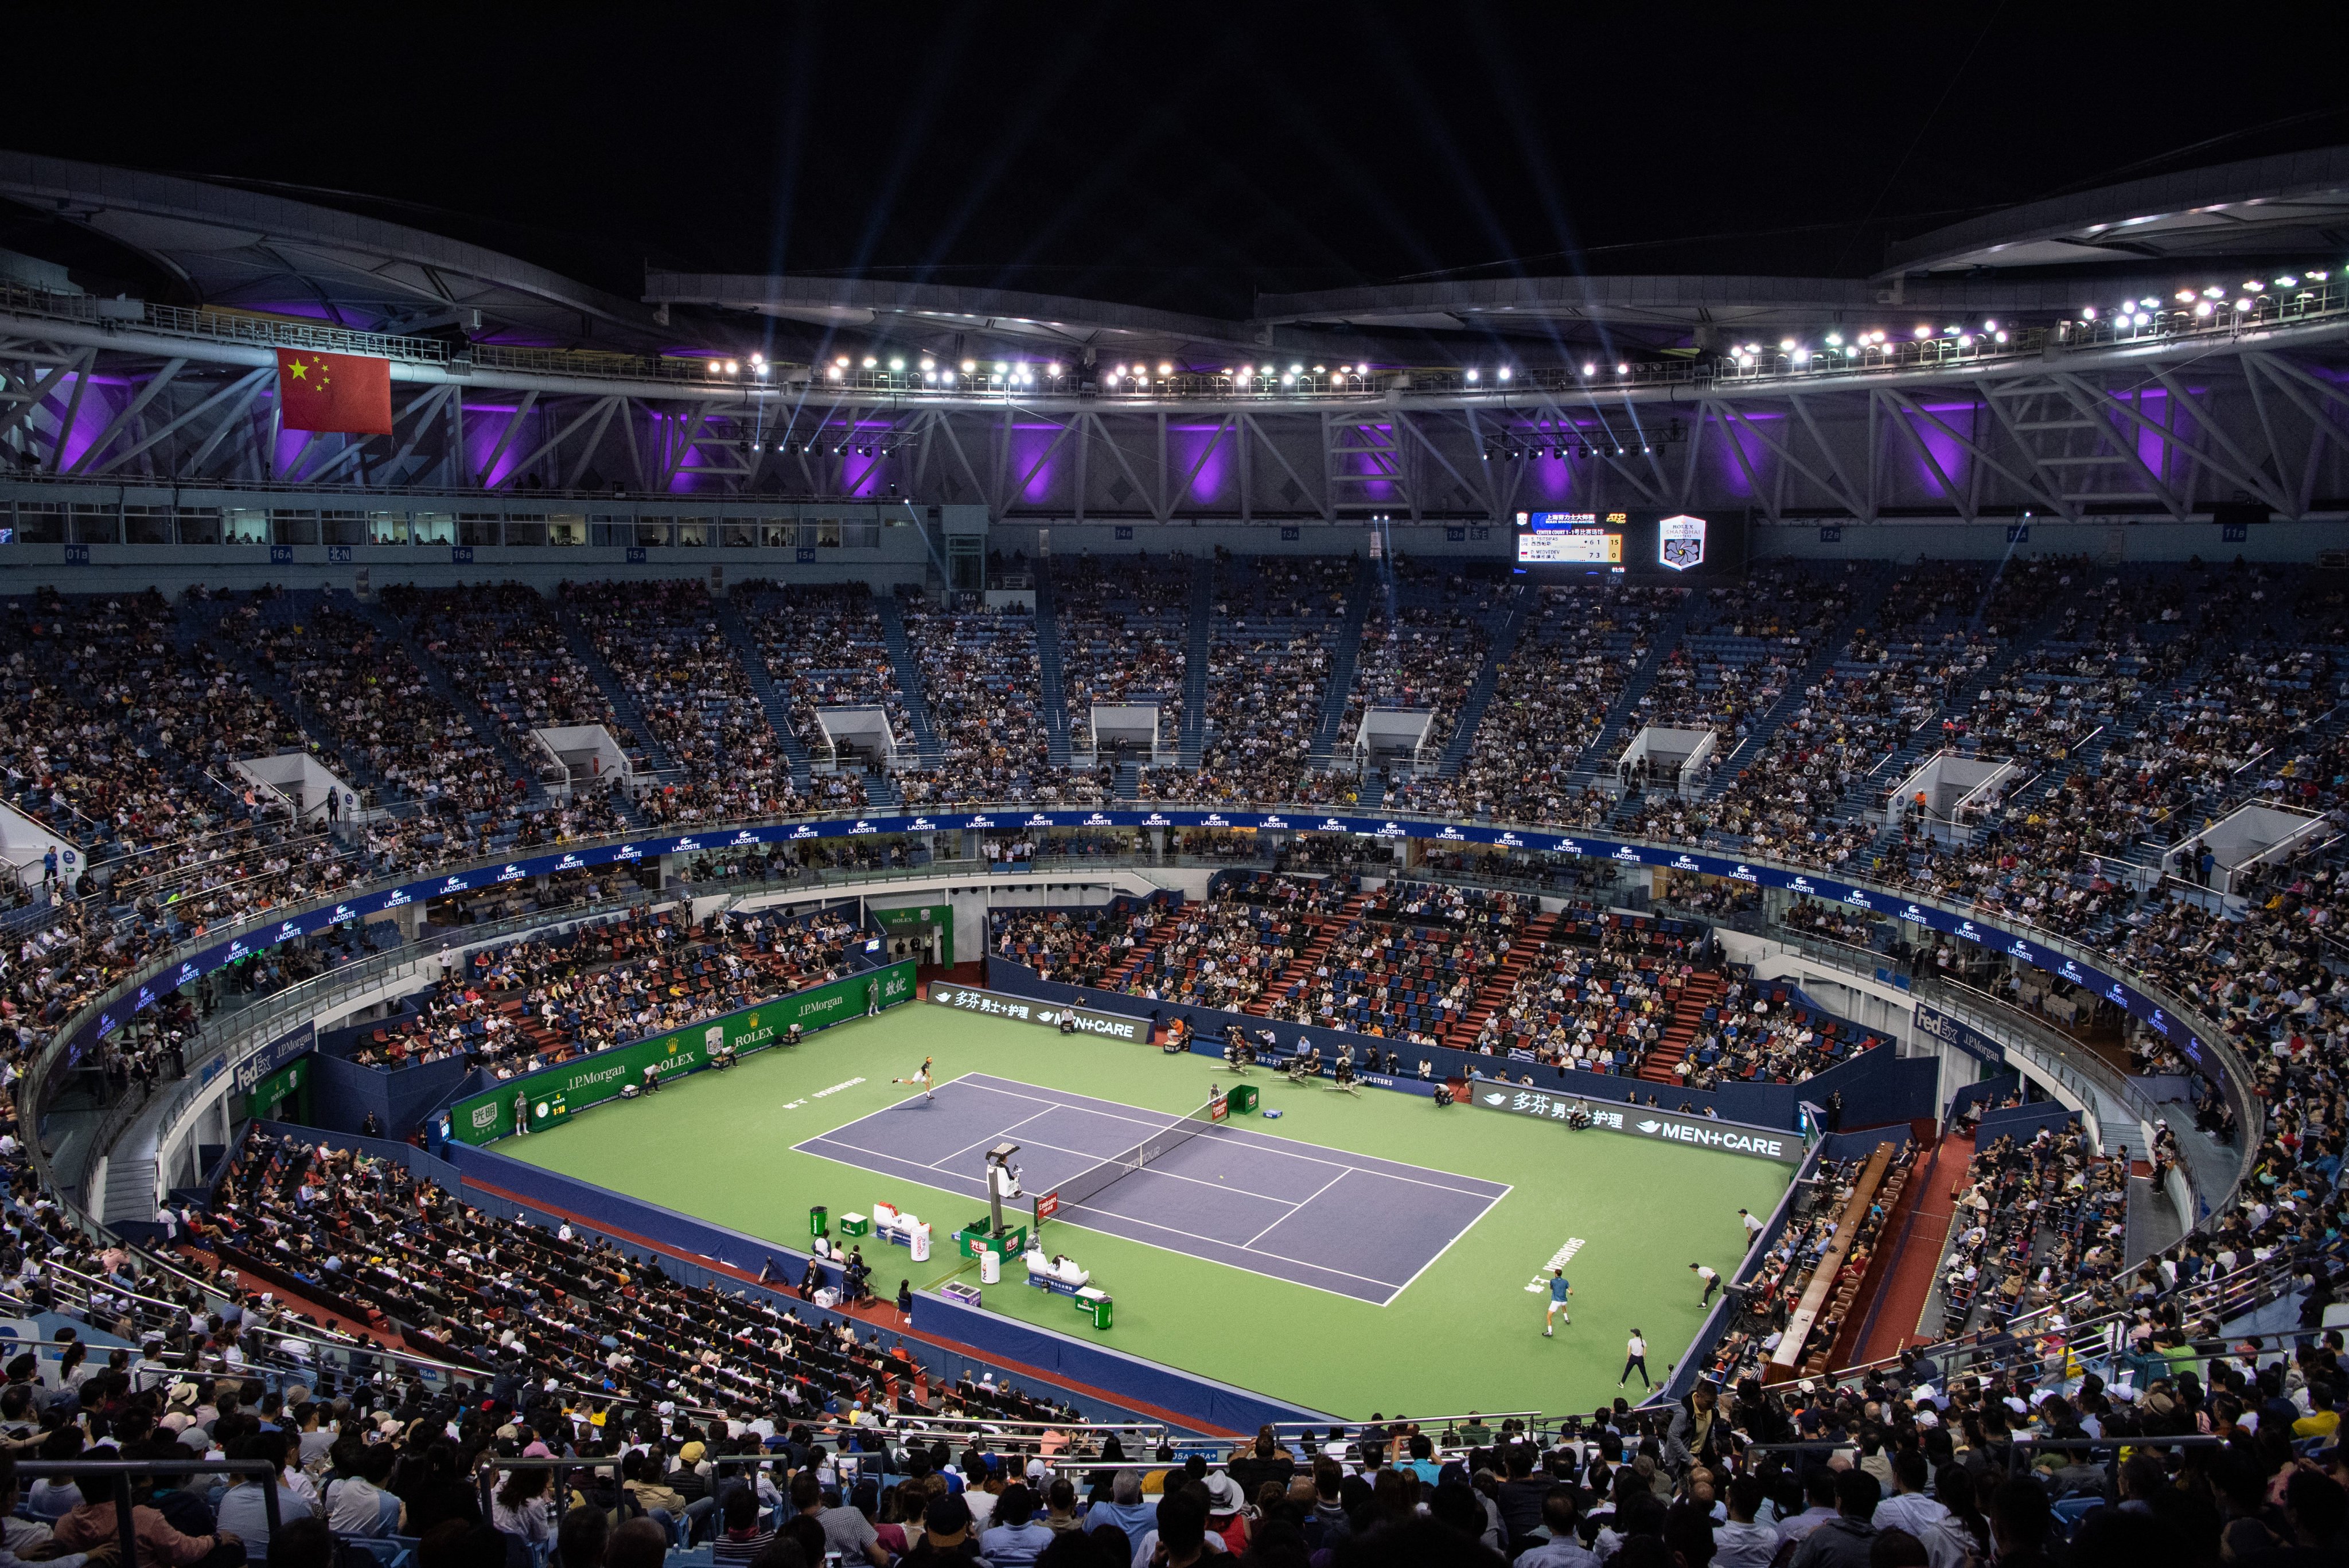 The Rolex Shanghai Masters tournament is set to return to the professional tennis calendar this October, with the event taking place at the Qizhong Stadium in Shanghai. Photo: Rolex